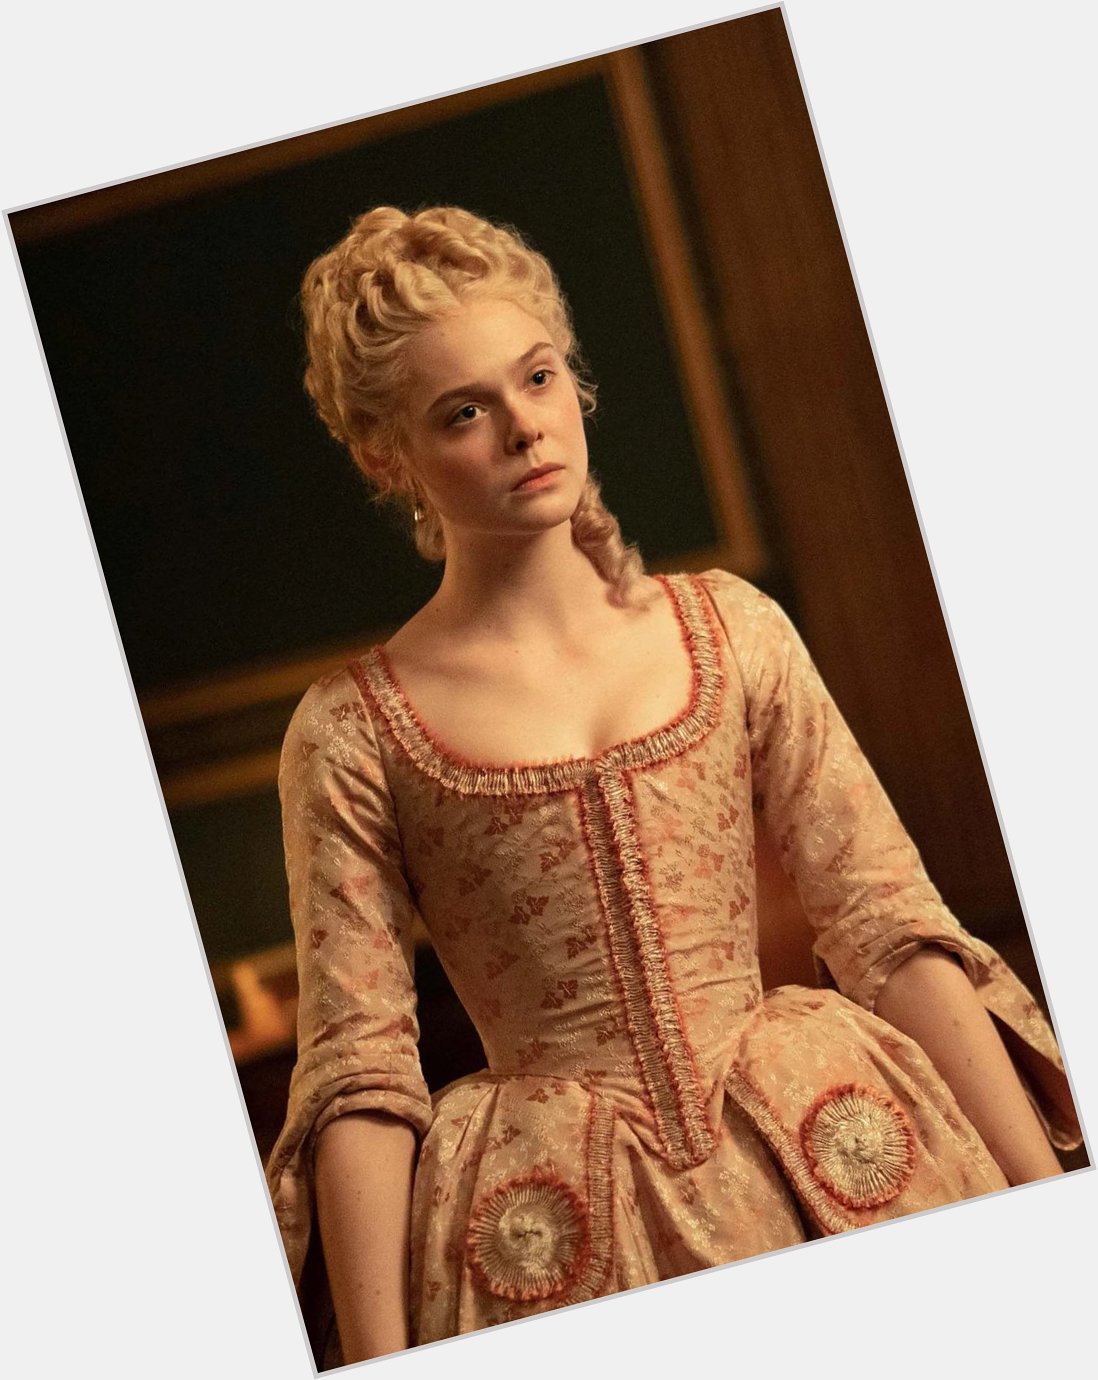 Happy birthday to elle fanning! literally counting down the days until I see her on screen as catherine again 